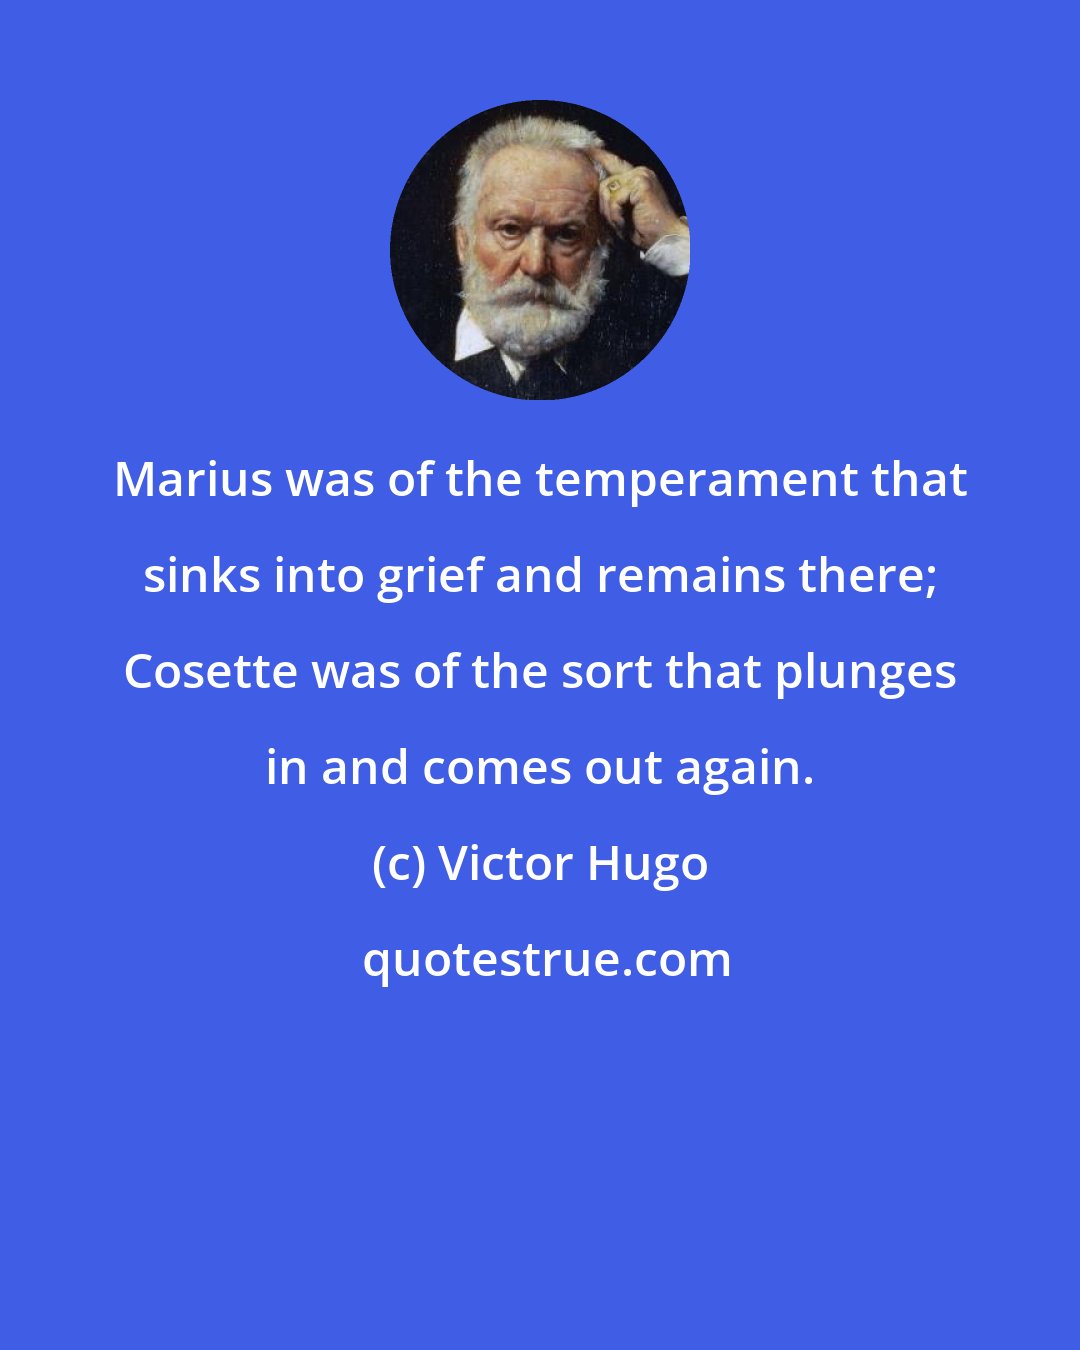 Victor Hugo: Marius was of the temperament that sinks into grief and remains there; Cosette was of the sort that plunges in and comes out again.